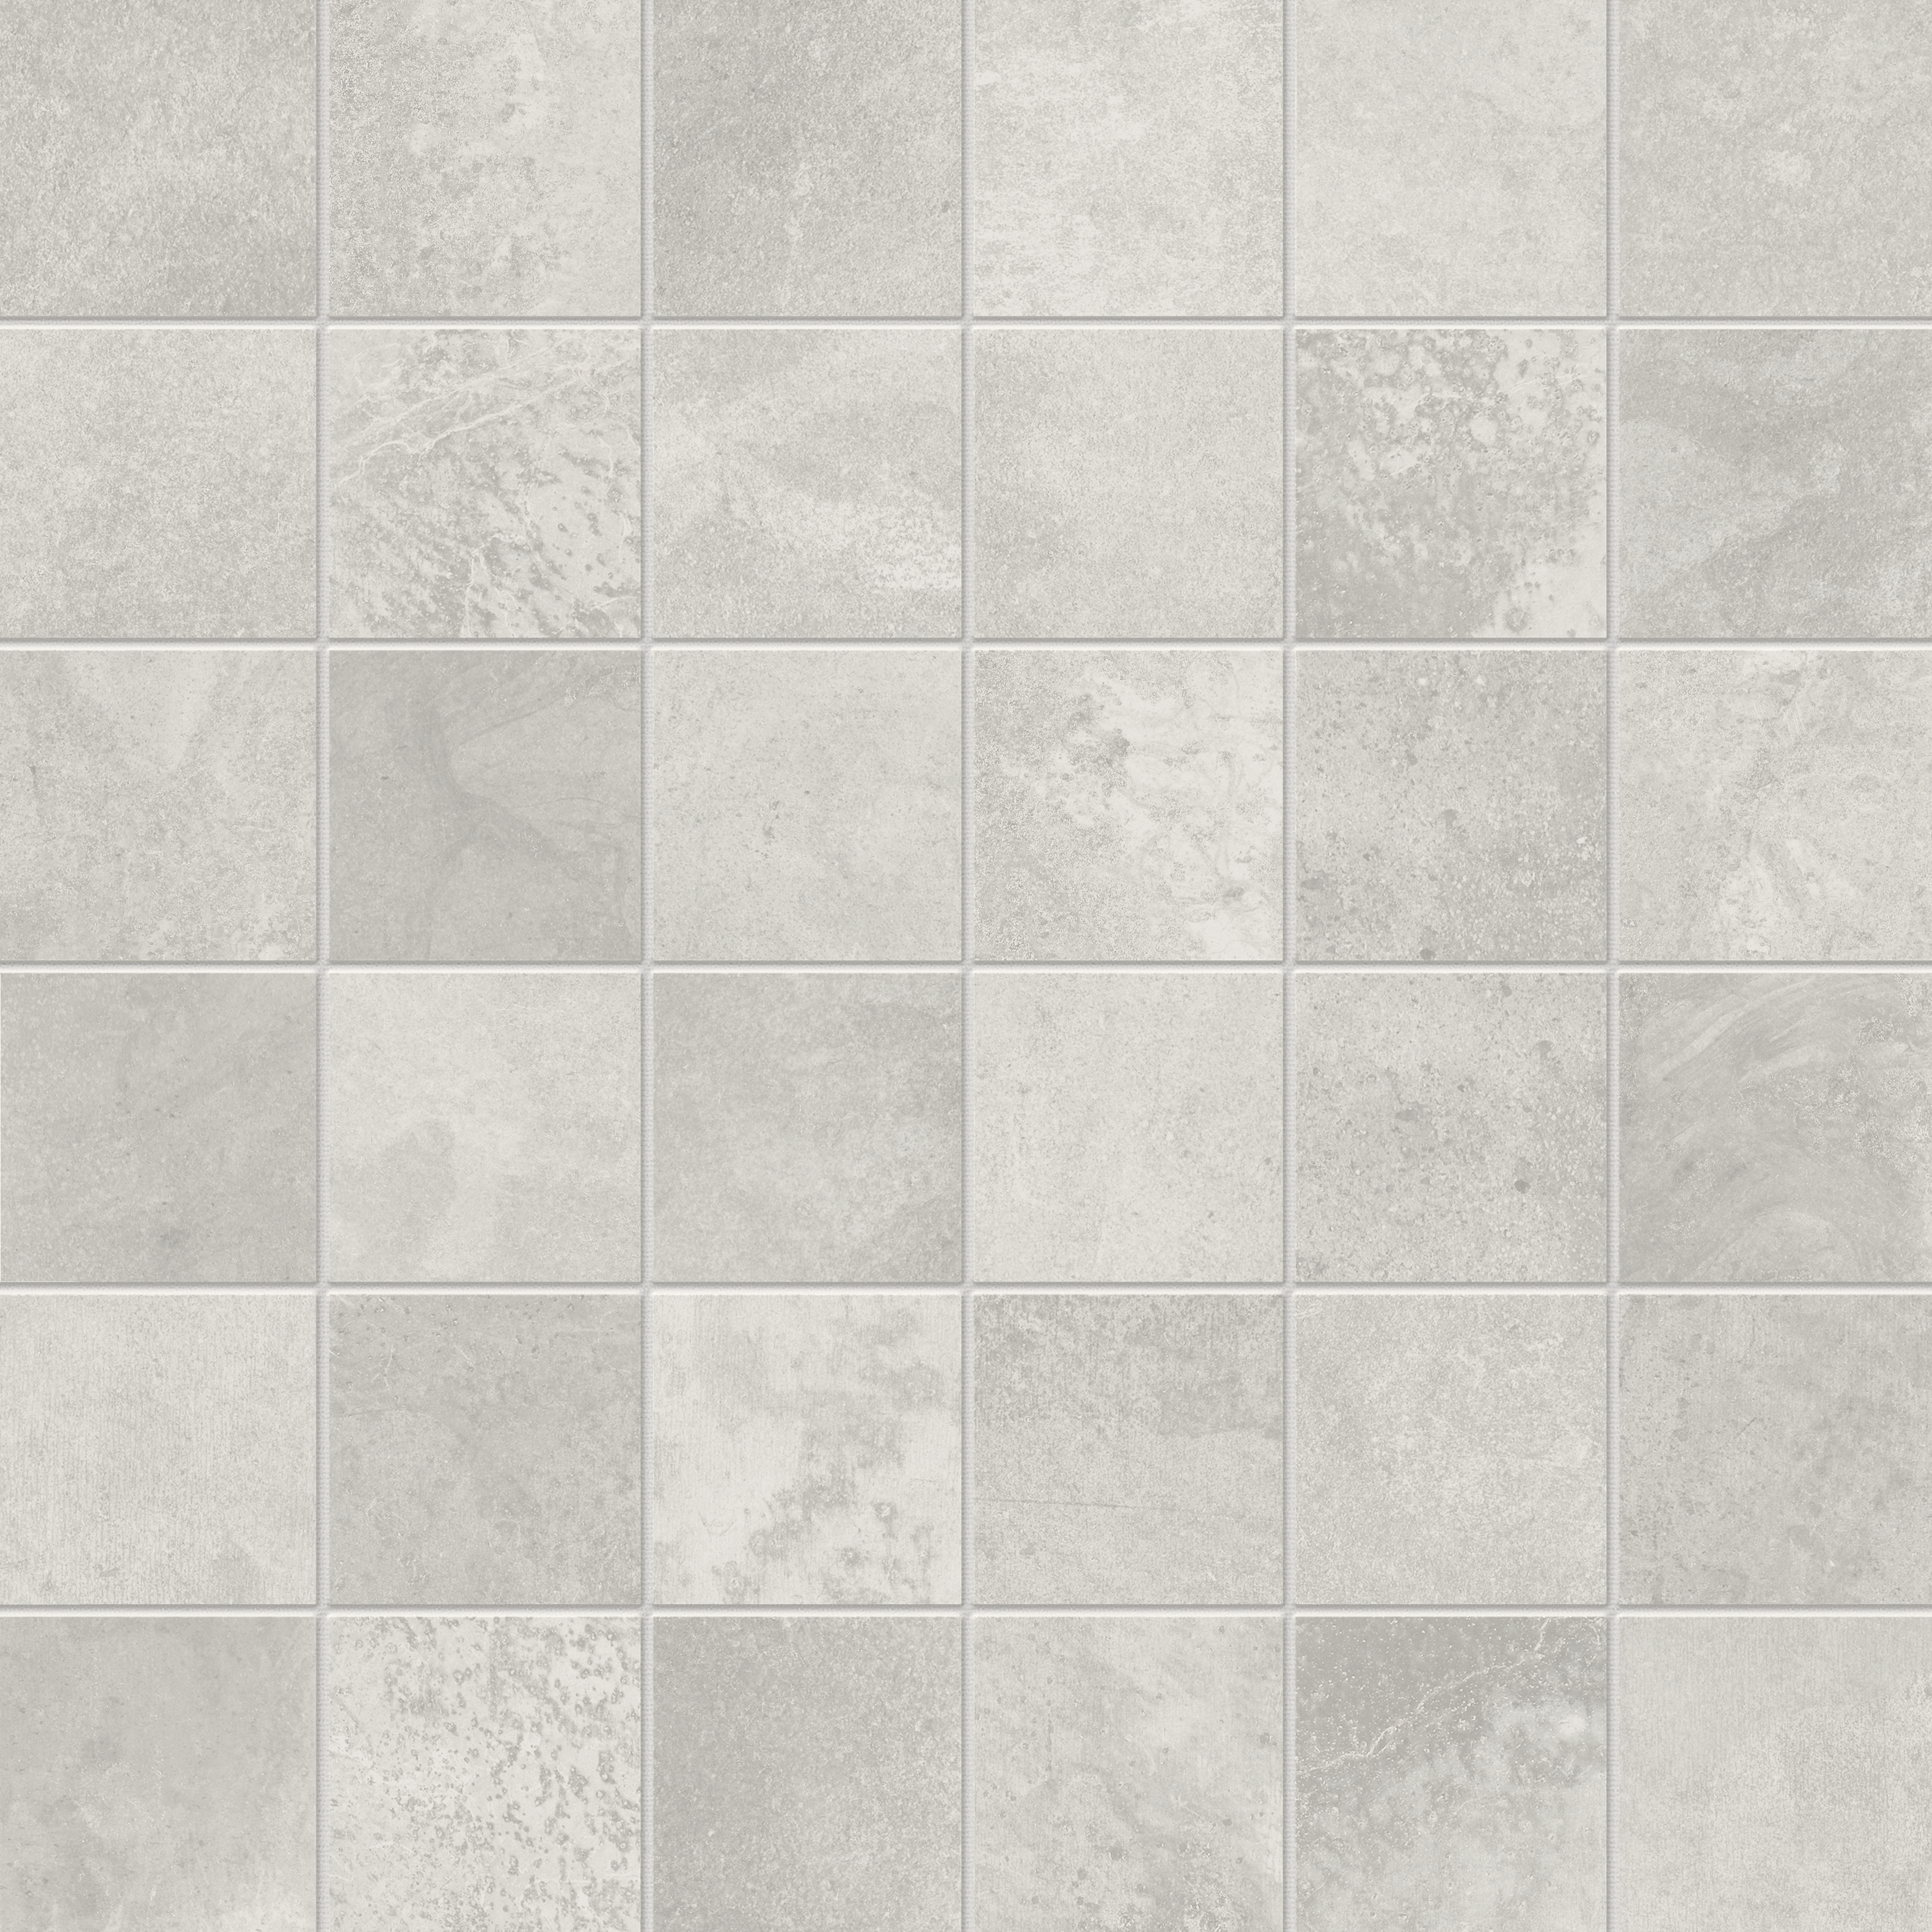 lithium straight stack 2x2-inch pattern color body porcelain mosaic from ceraforge anatolia collection distributed by surface group international matte finish straight edge edge mesh shape